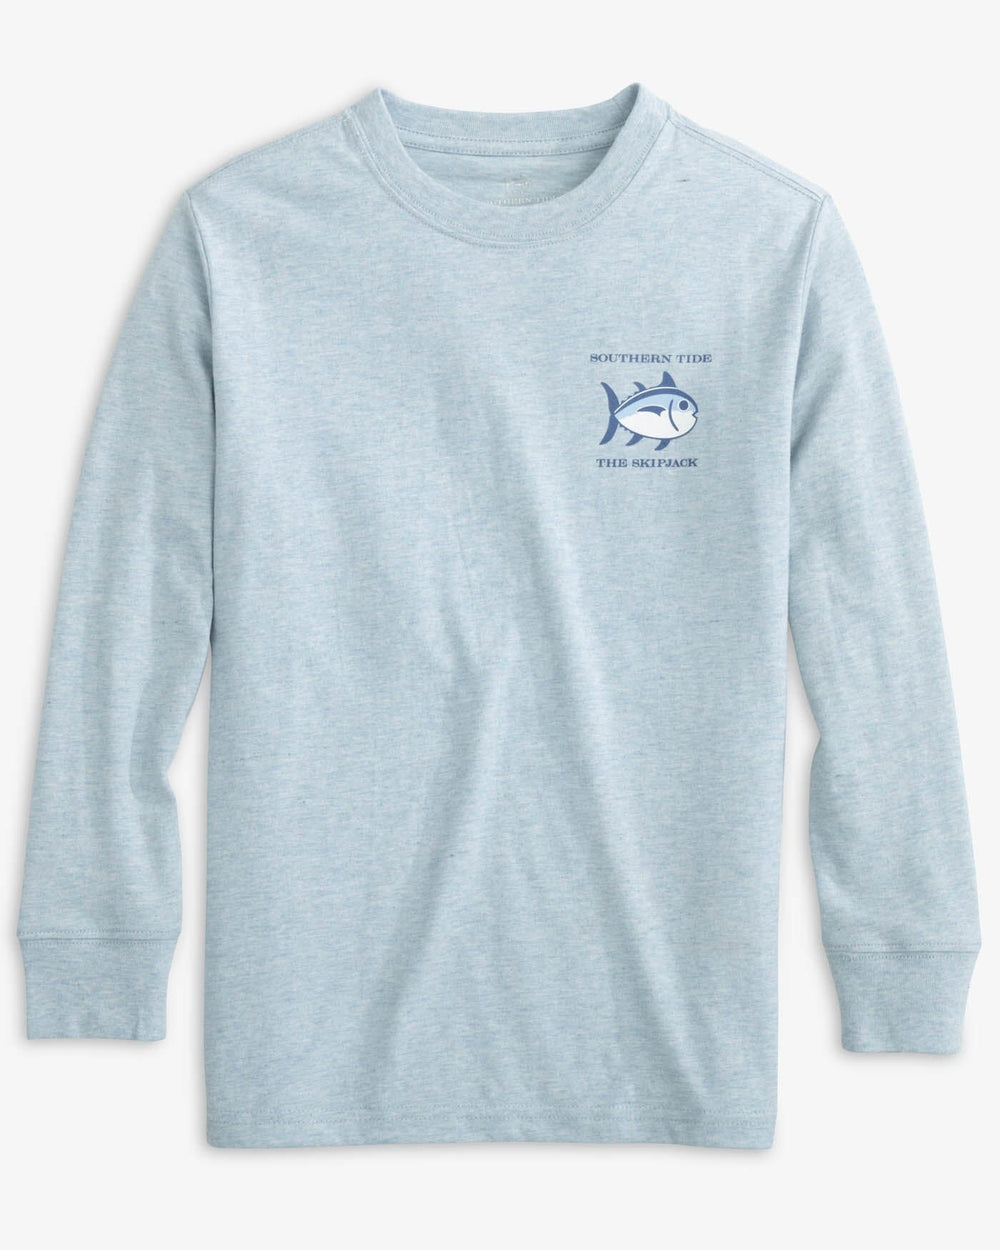 The front view of the Southern Tide Kids Heather Original Skipjack Long Sleeve T-Shirt by Southern Tide - Heather Dream Blue